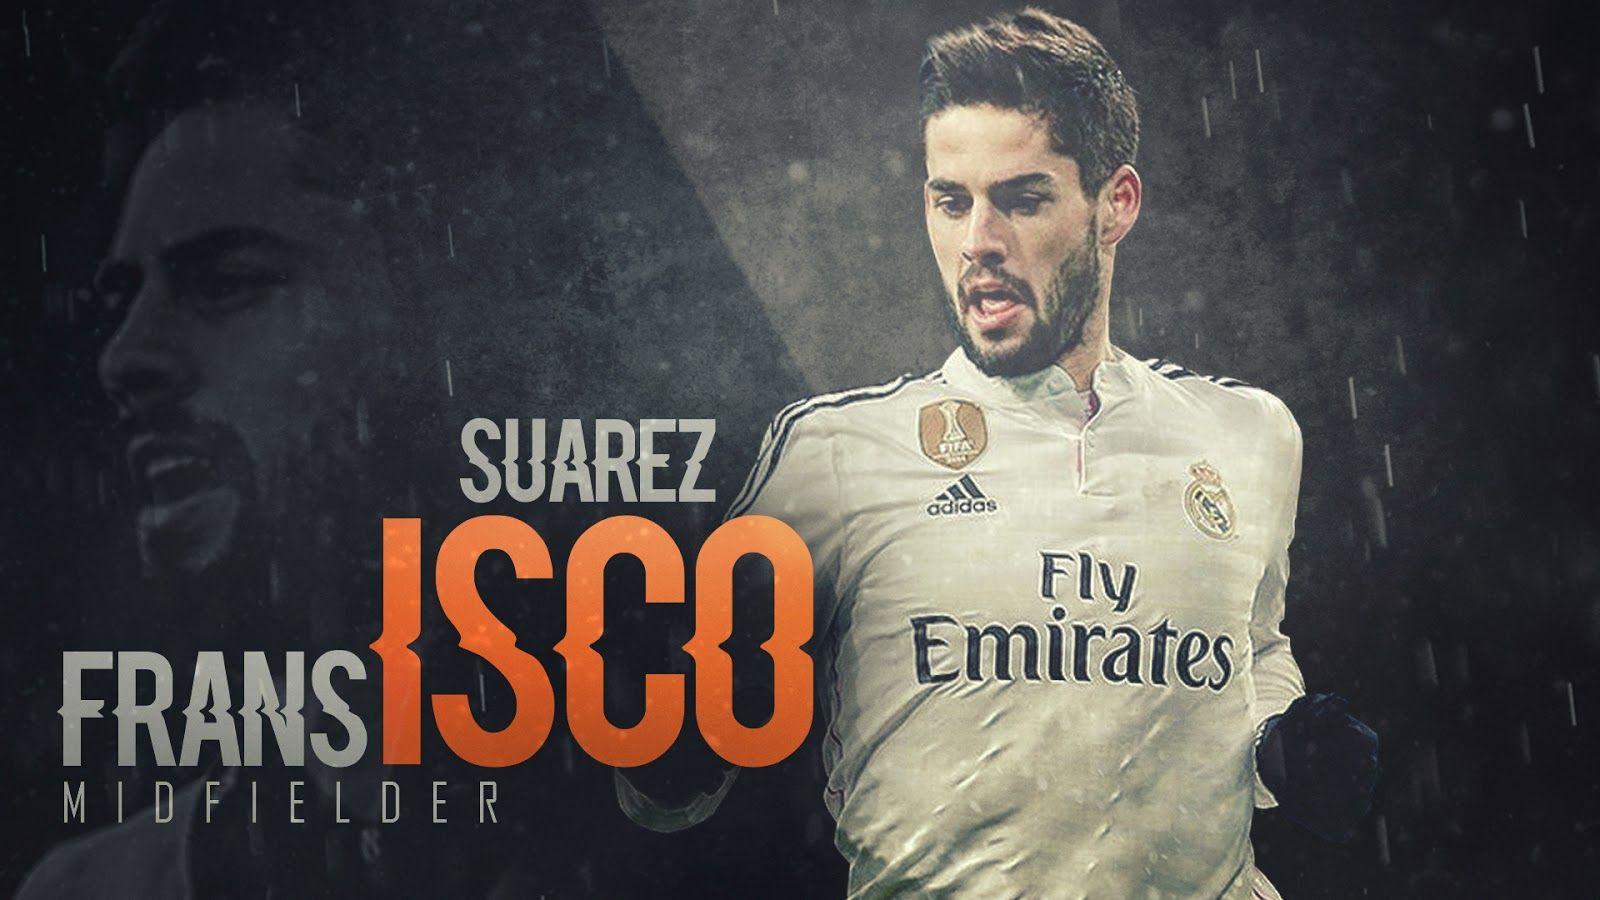 Magic Midfielder Isco and James Real Madrid